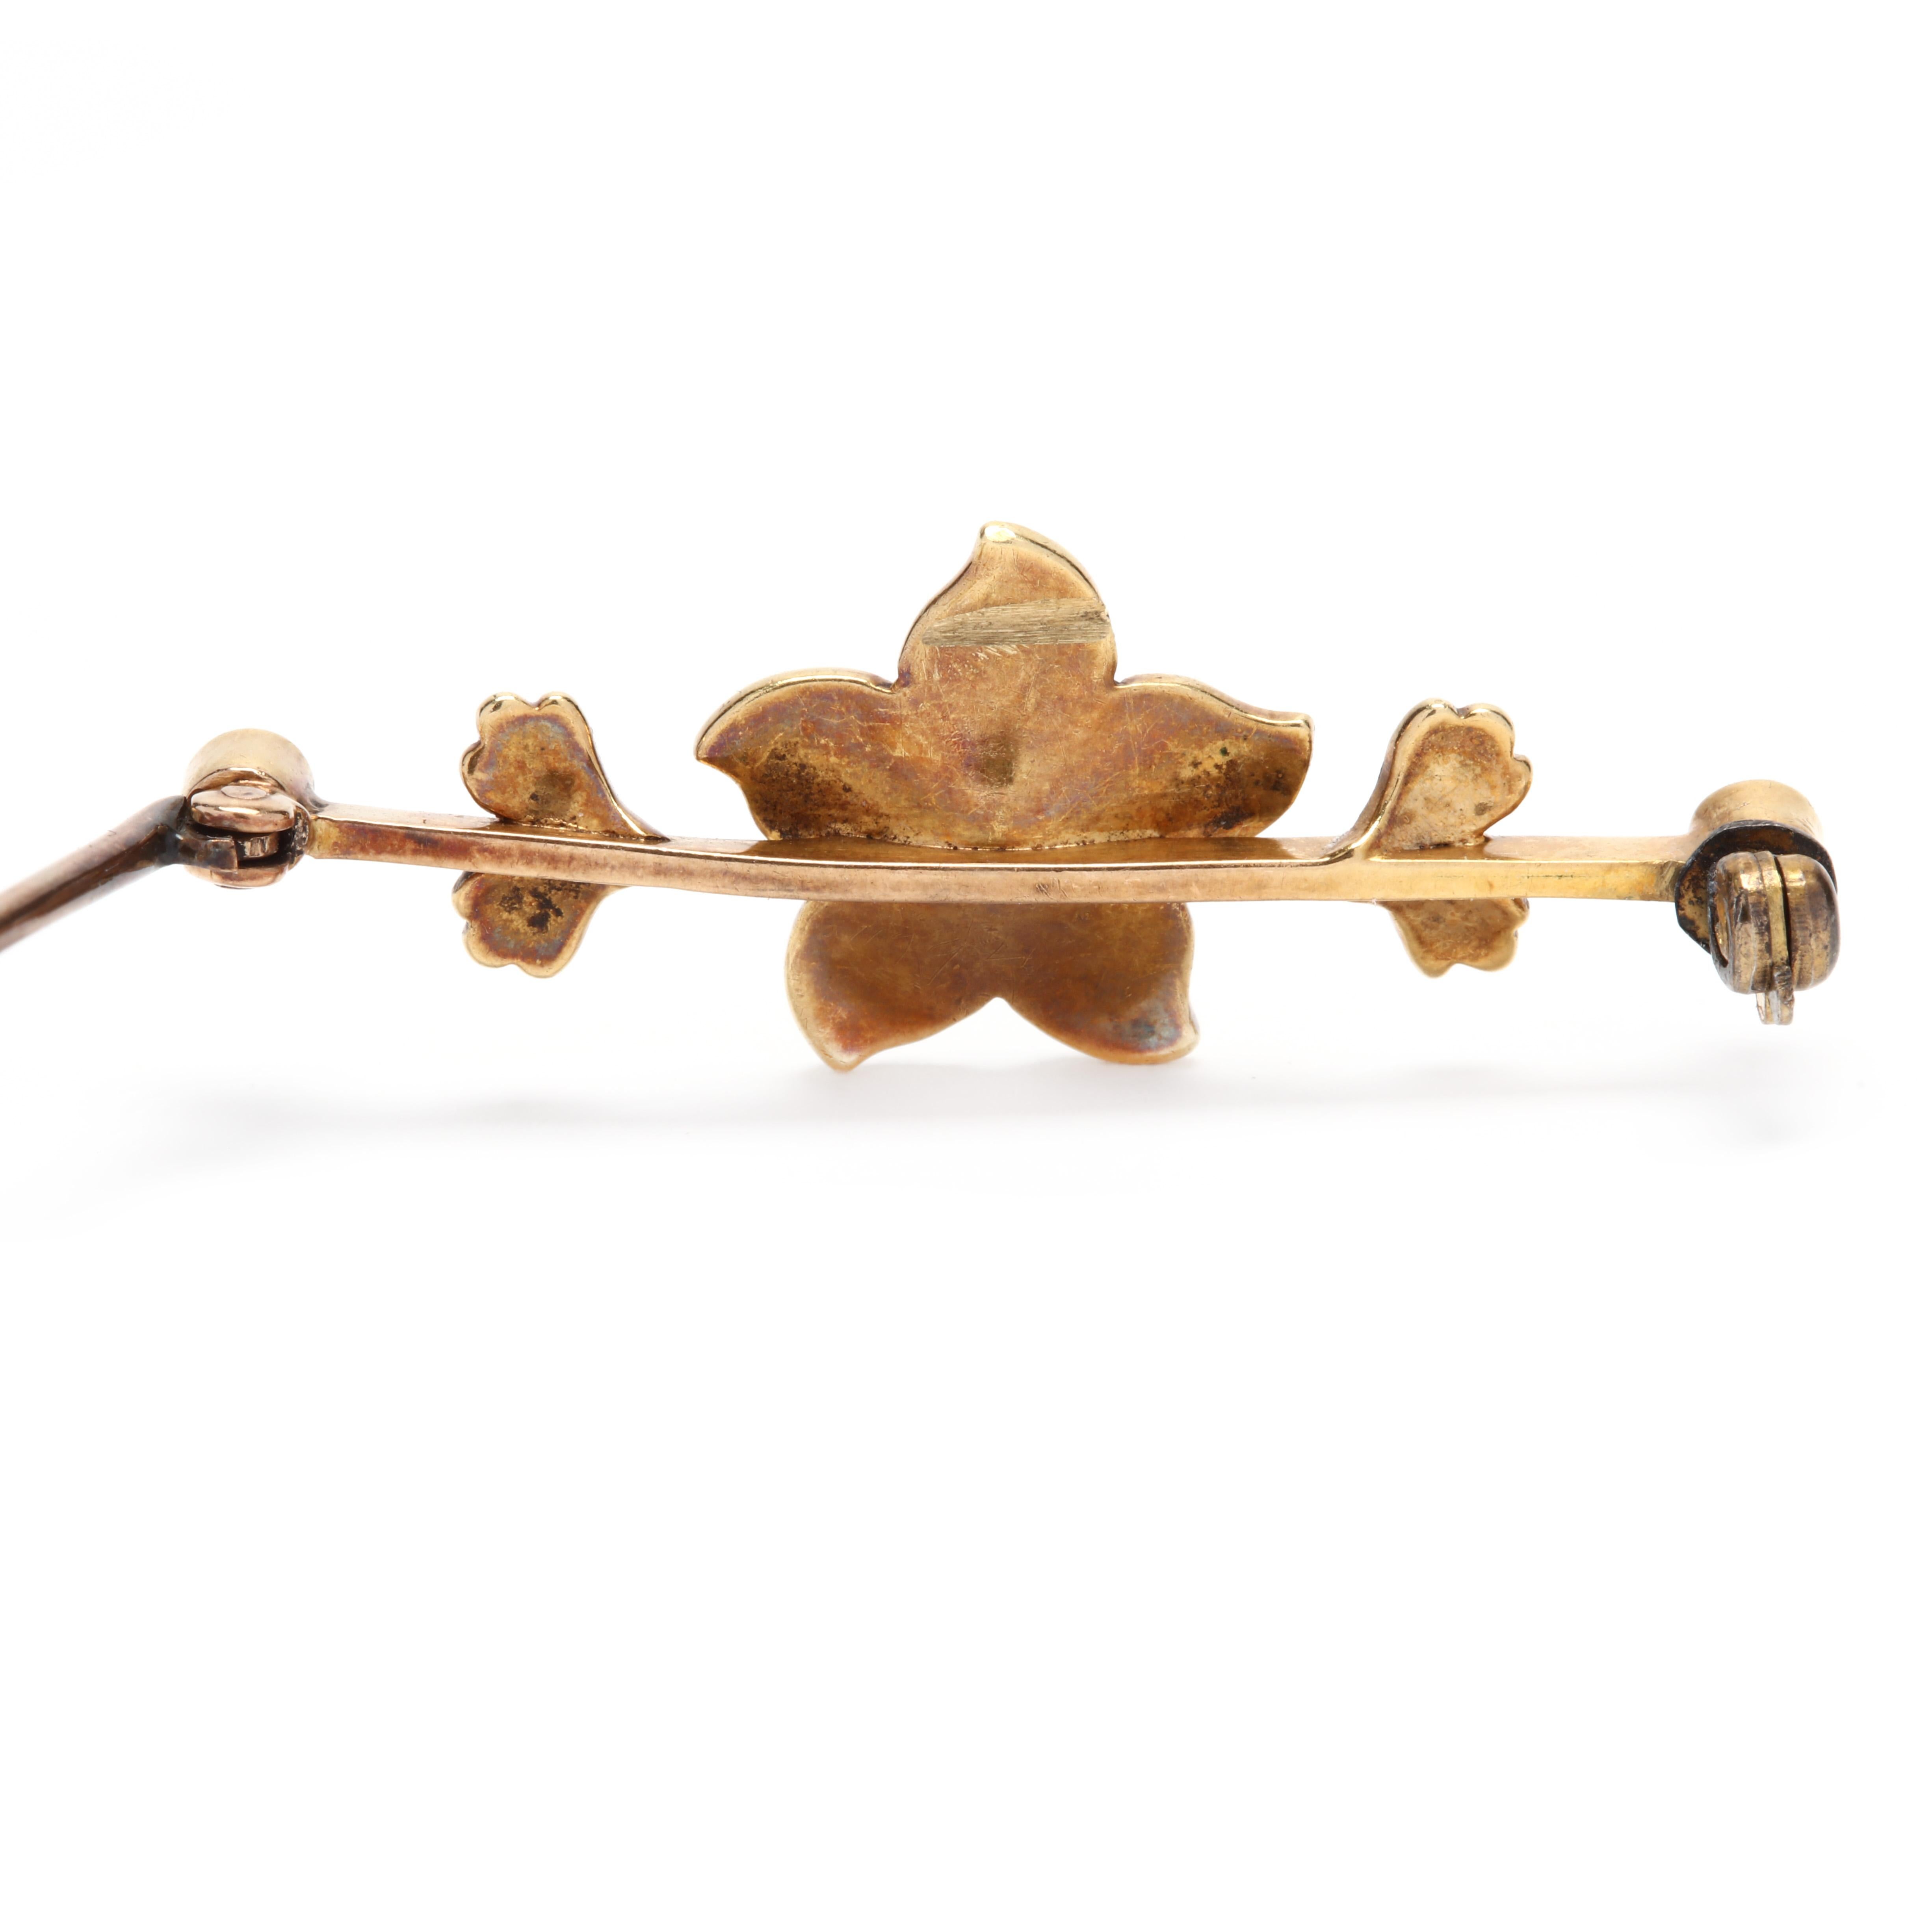 A Victorian 18 karat yellow gold and split pearl floral bar brooch. Of a linear design with a central flower motif in the center set with various sizes of split pearl, foliate motifs to each and a locking pin stem clasp.

Length: 1 1/2 in.
 
Width: